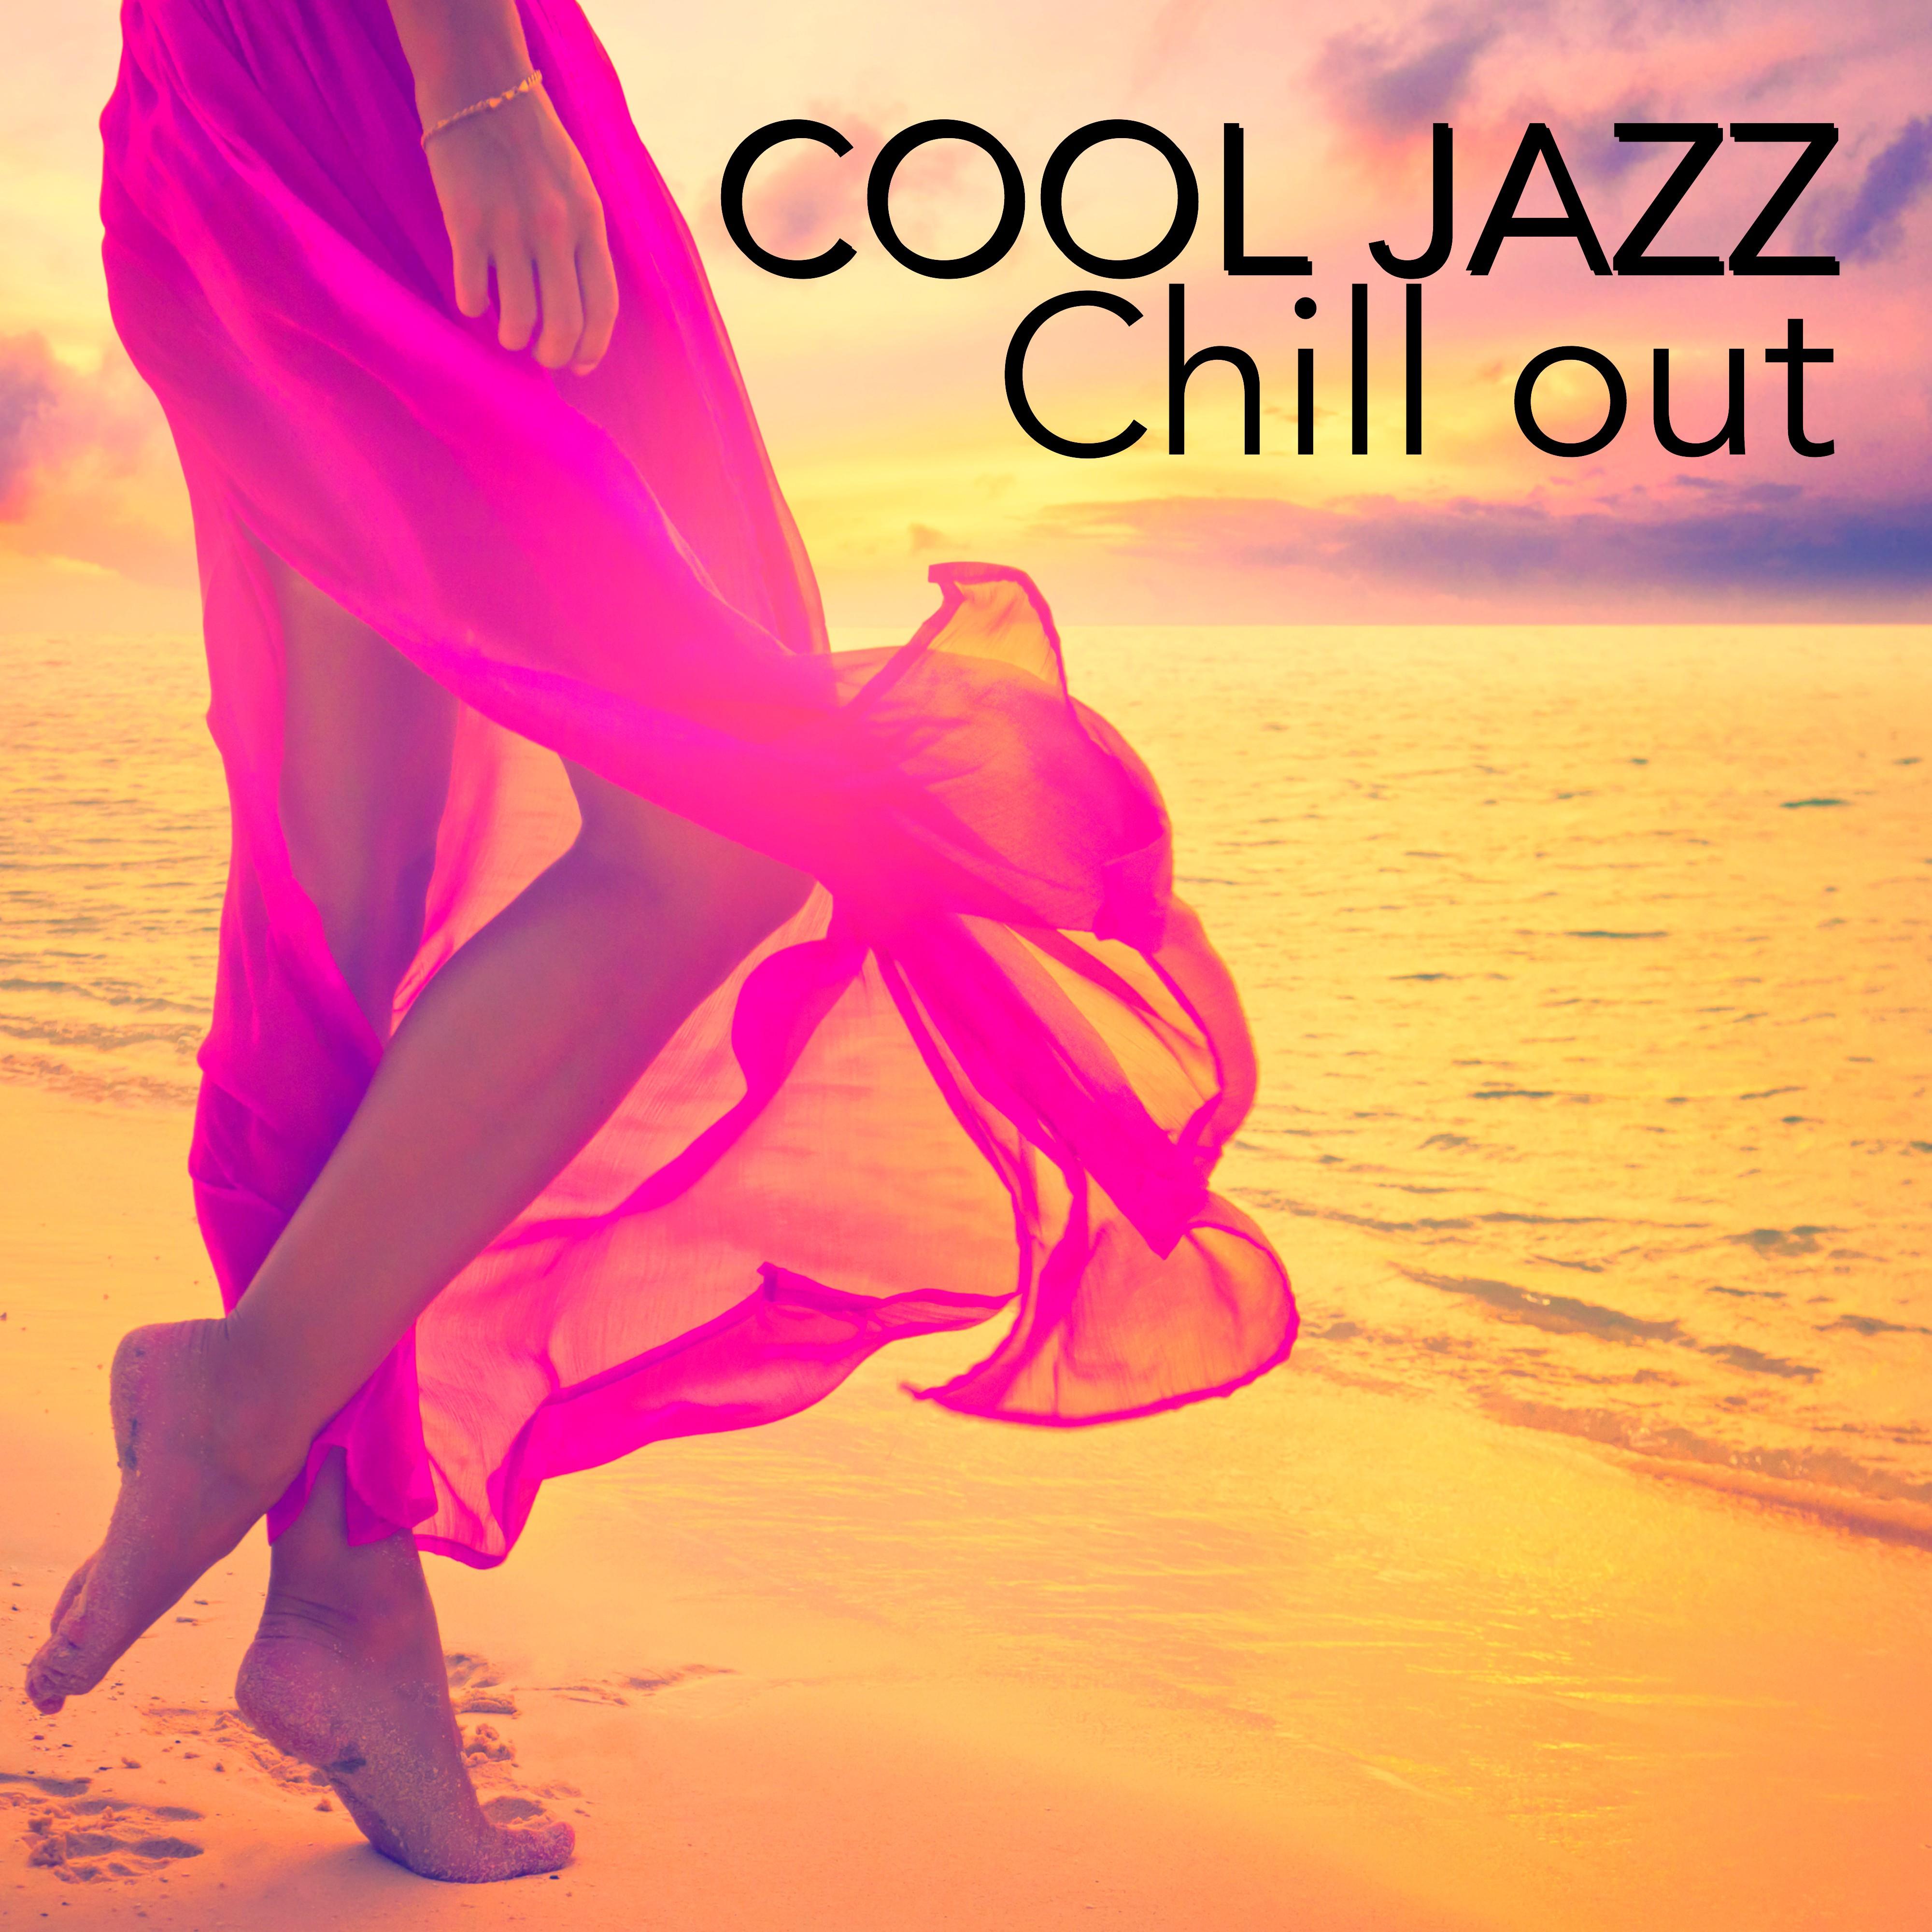 Cool Jazz Chill Out - Soothing Instrumental Jazz Music, Smooth Songs with Piano and Sax